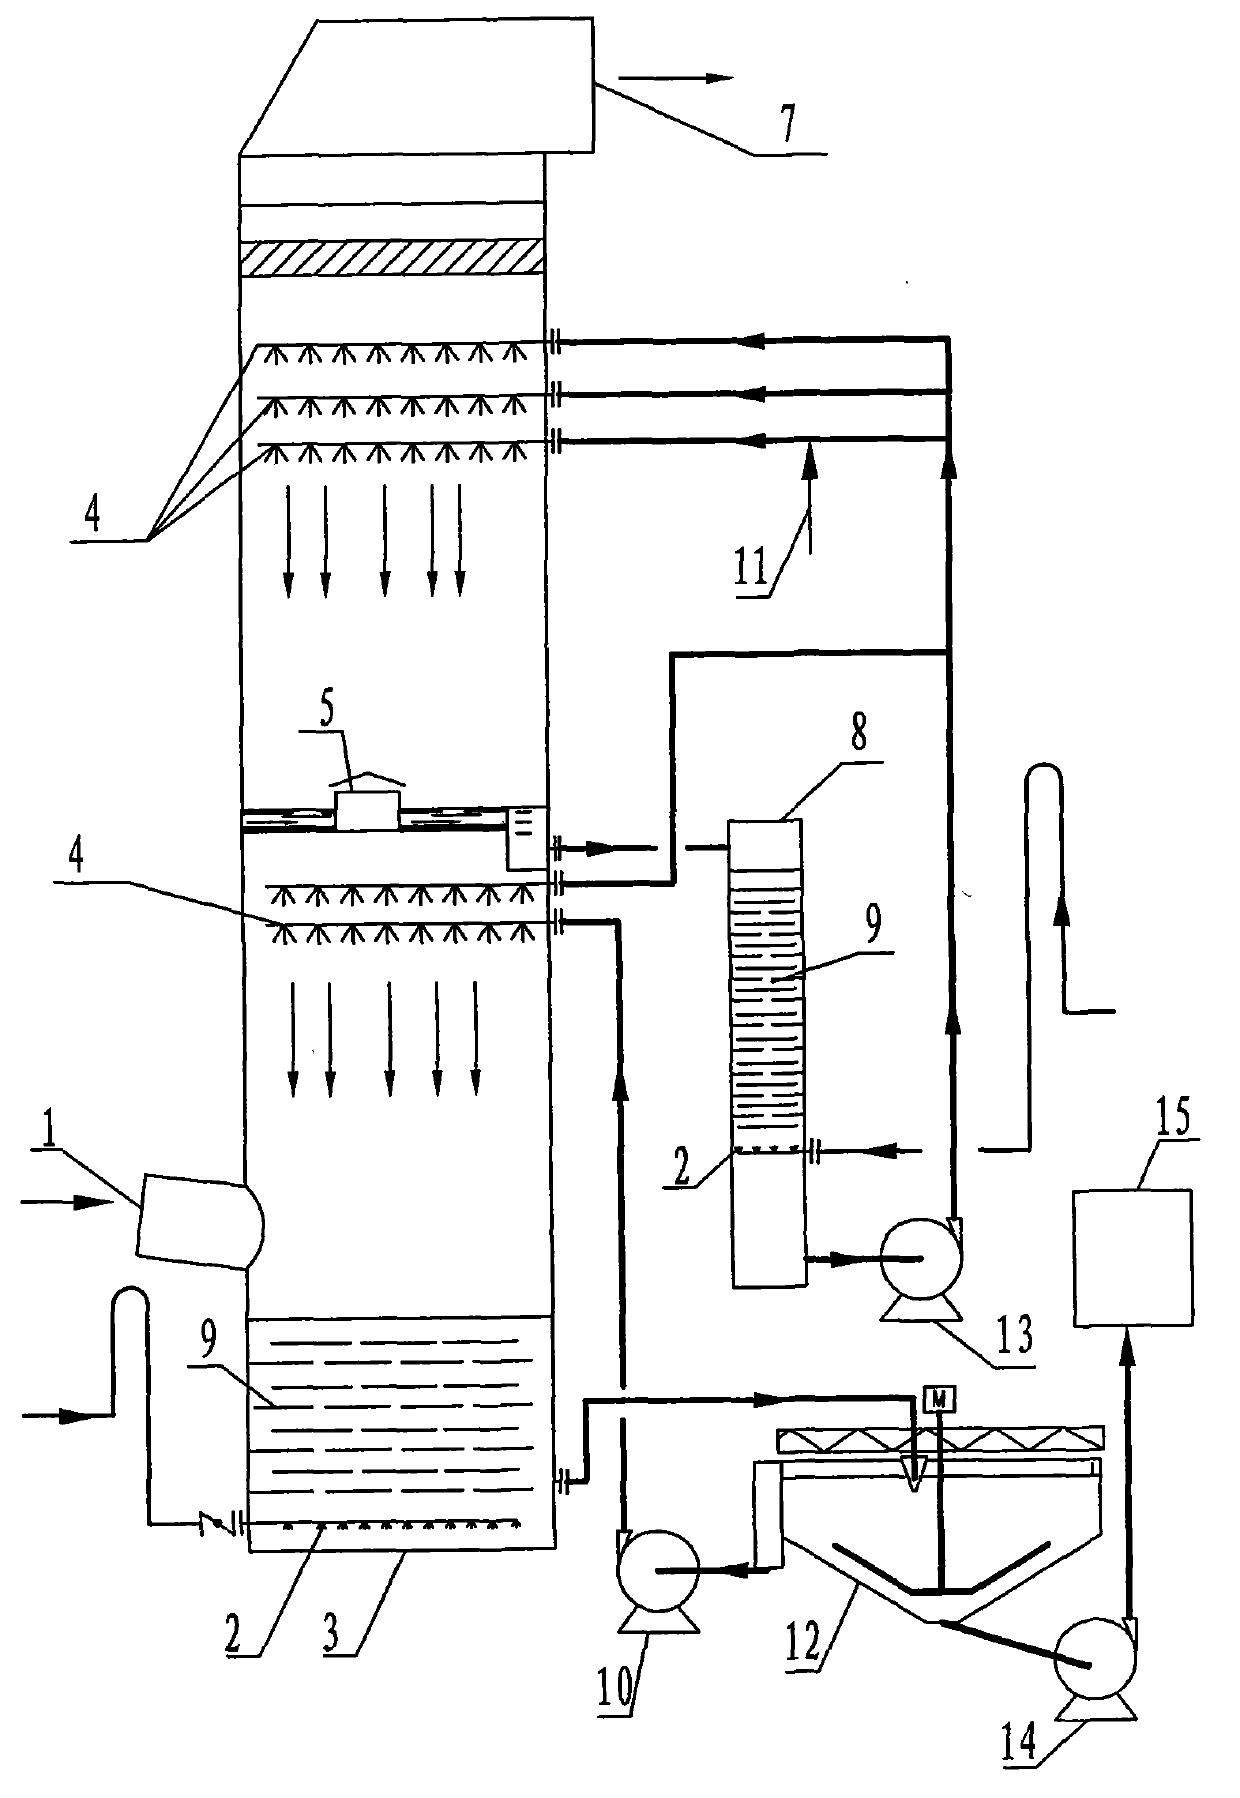 Ammonia desulfurization technology and device utilizing high potential energy